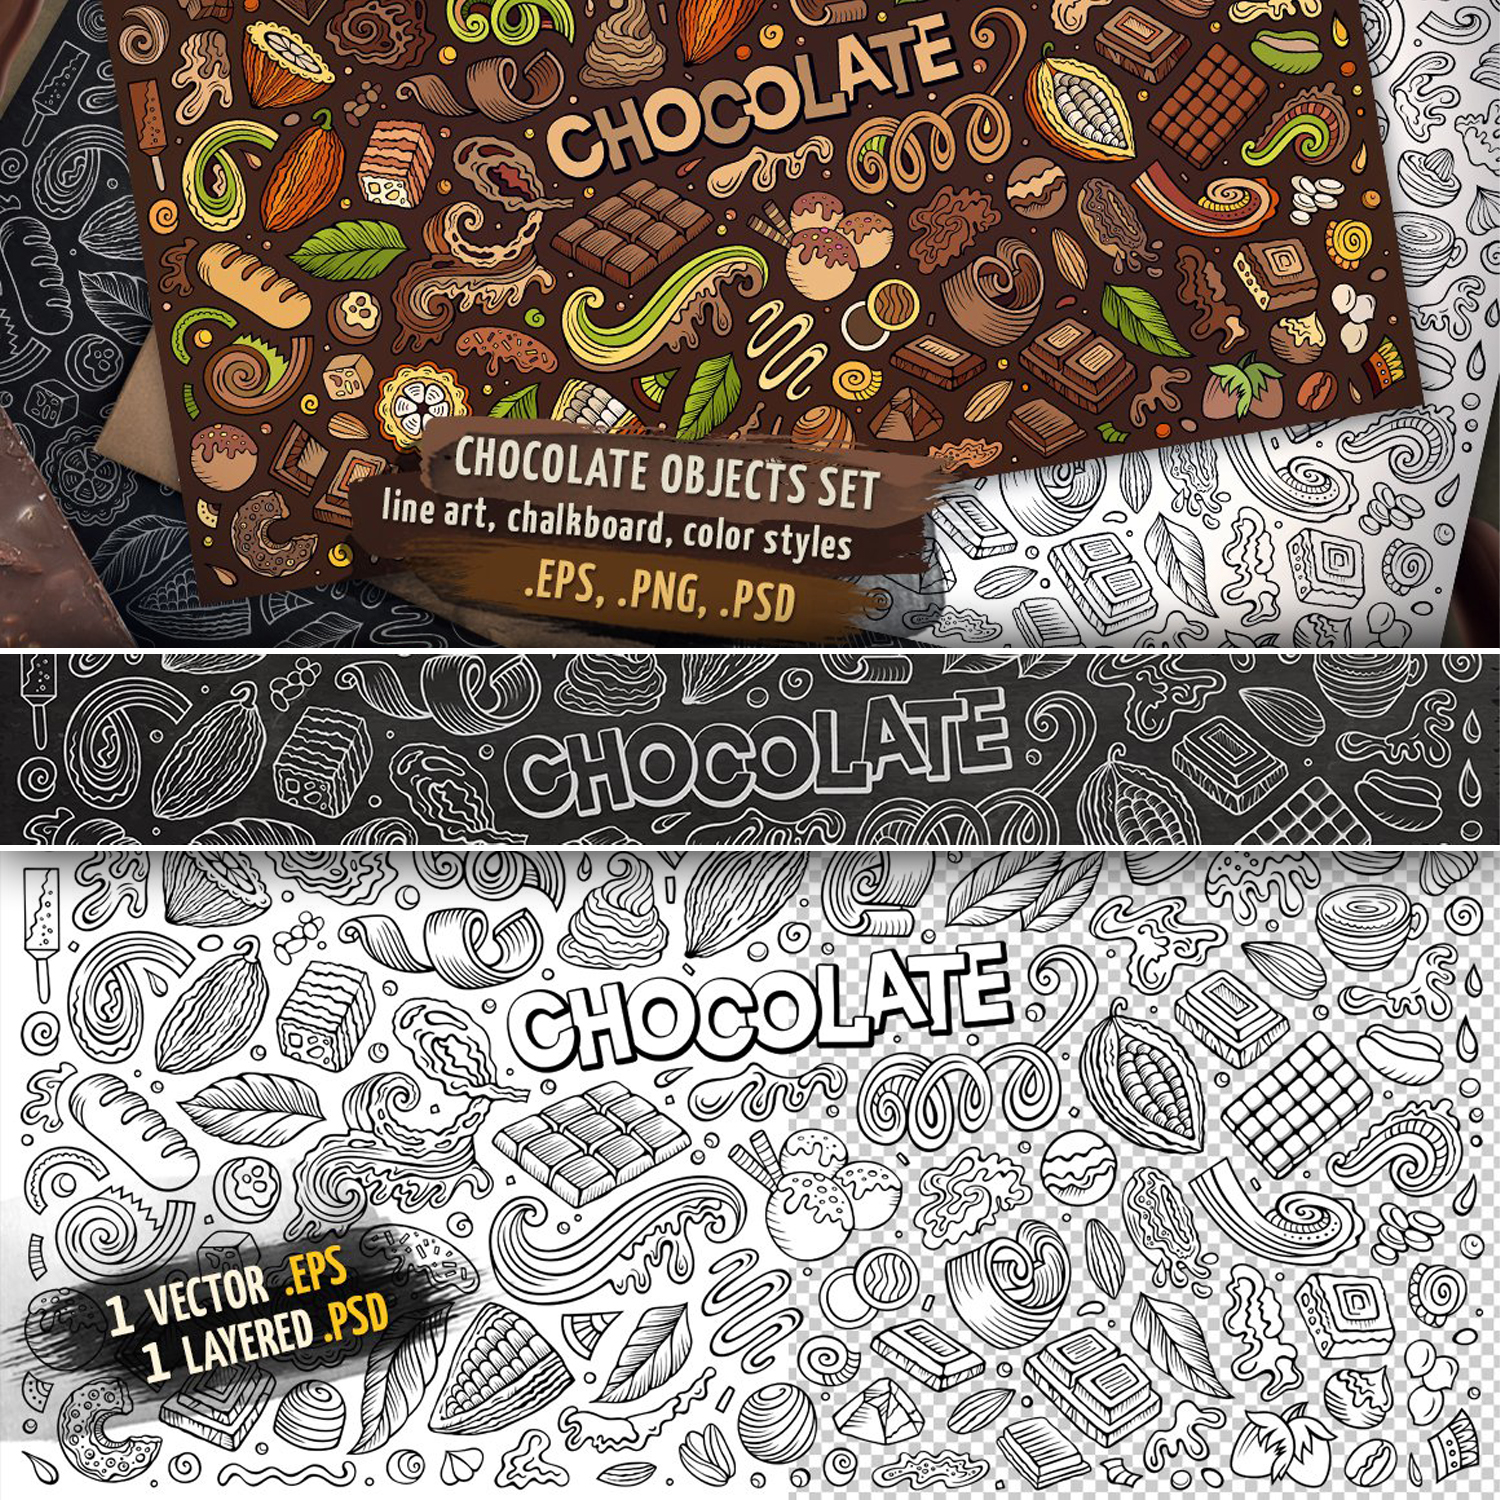 Disclosure of chocolate themes on your prints.